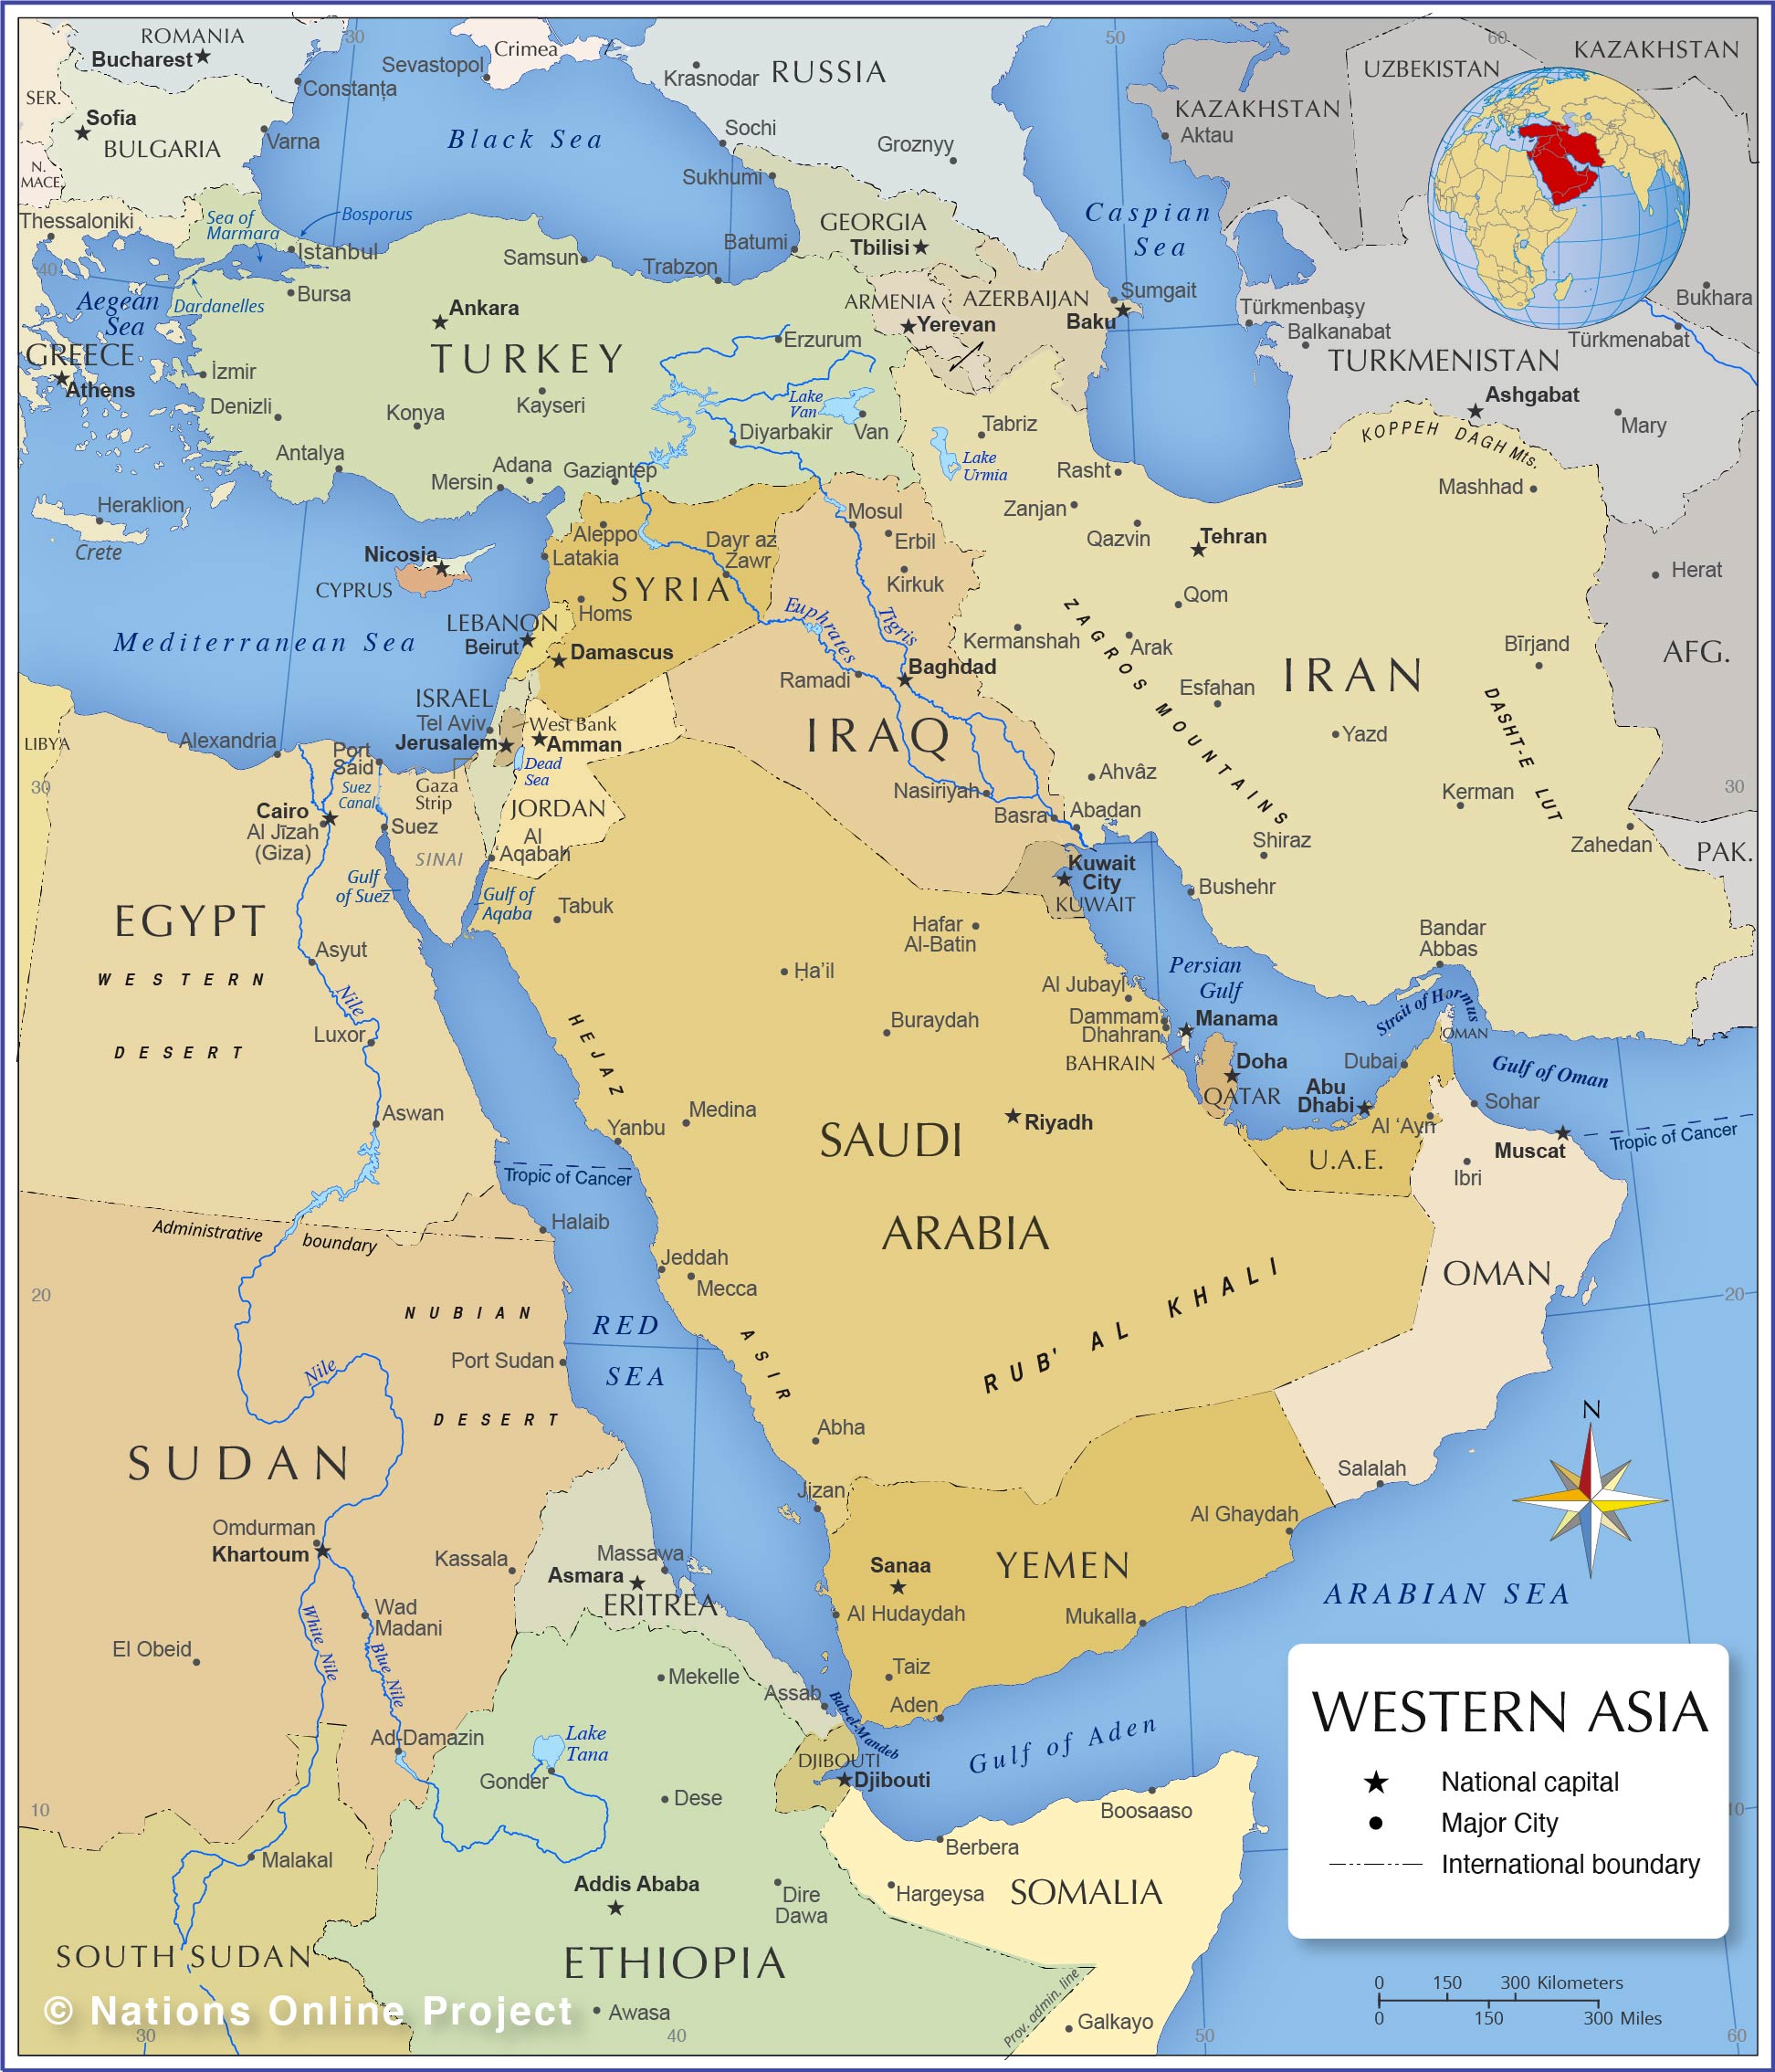 Political Map of Western Asia, the Middle East, and the Arabian Peninsula